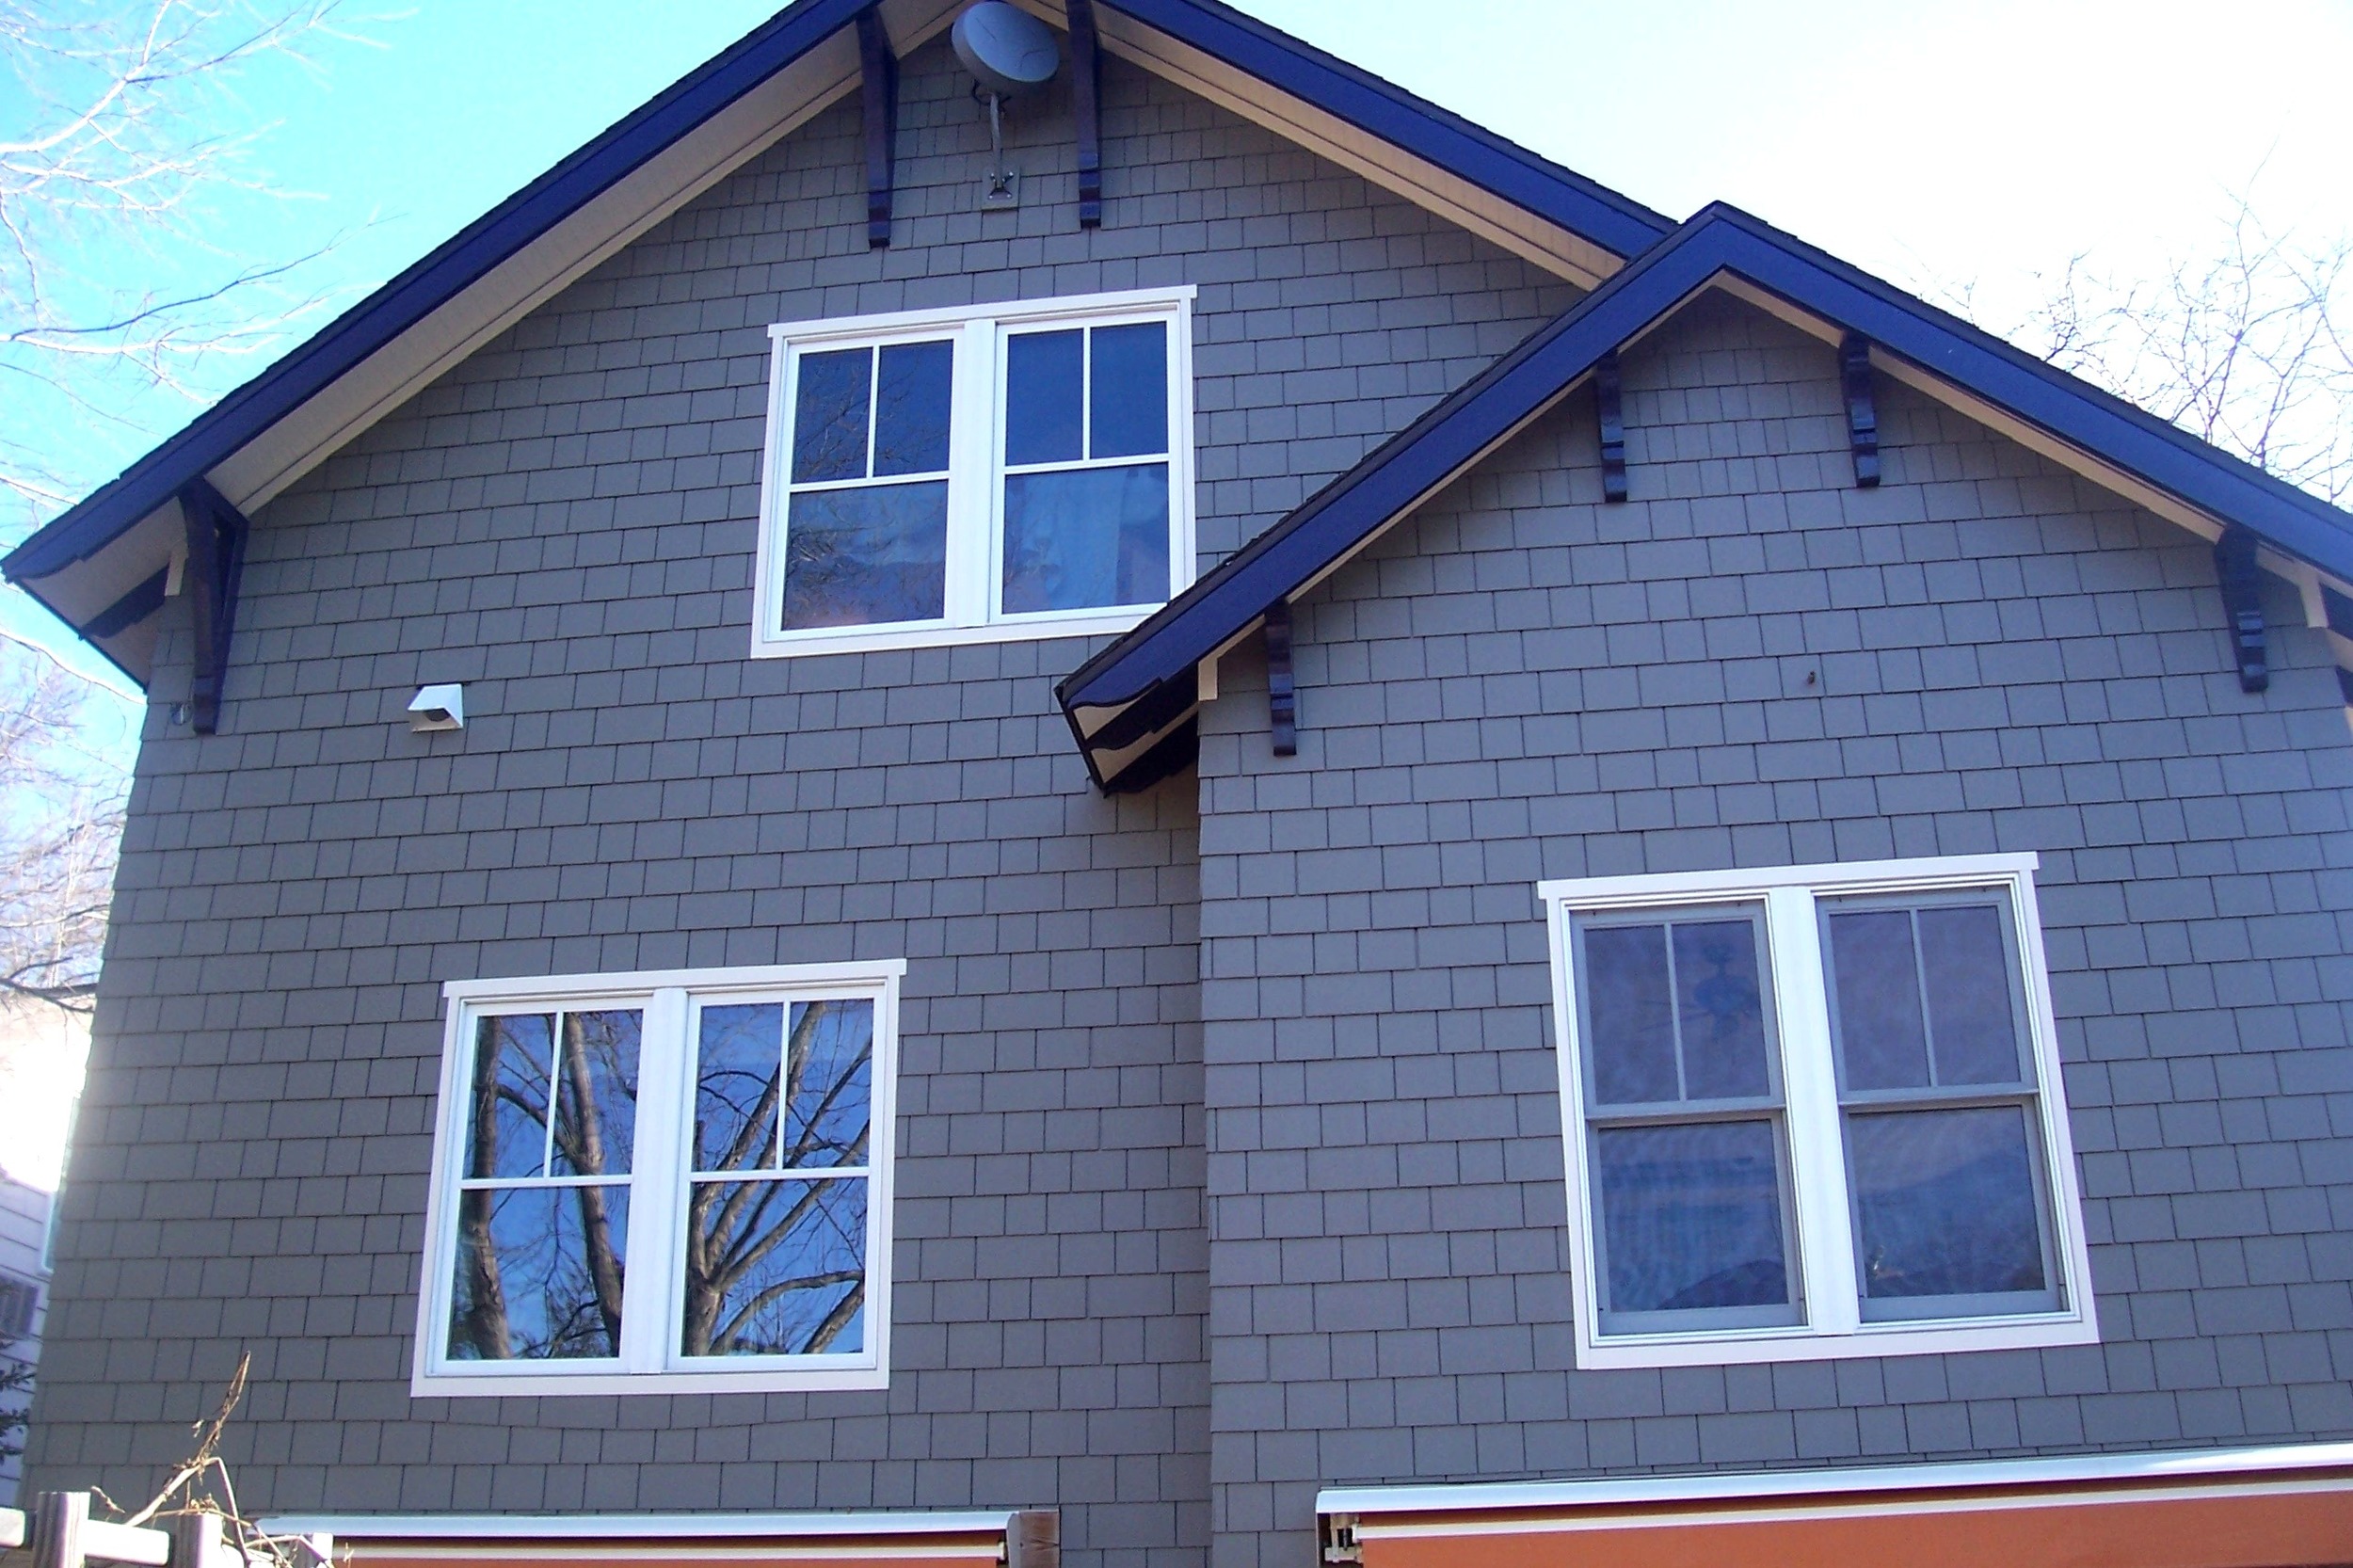  Exterior Siding and Trim Painted 